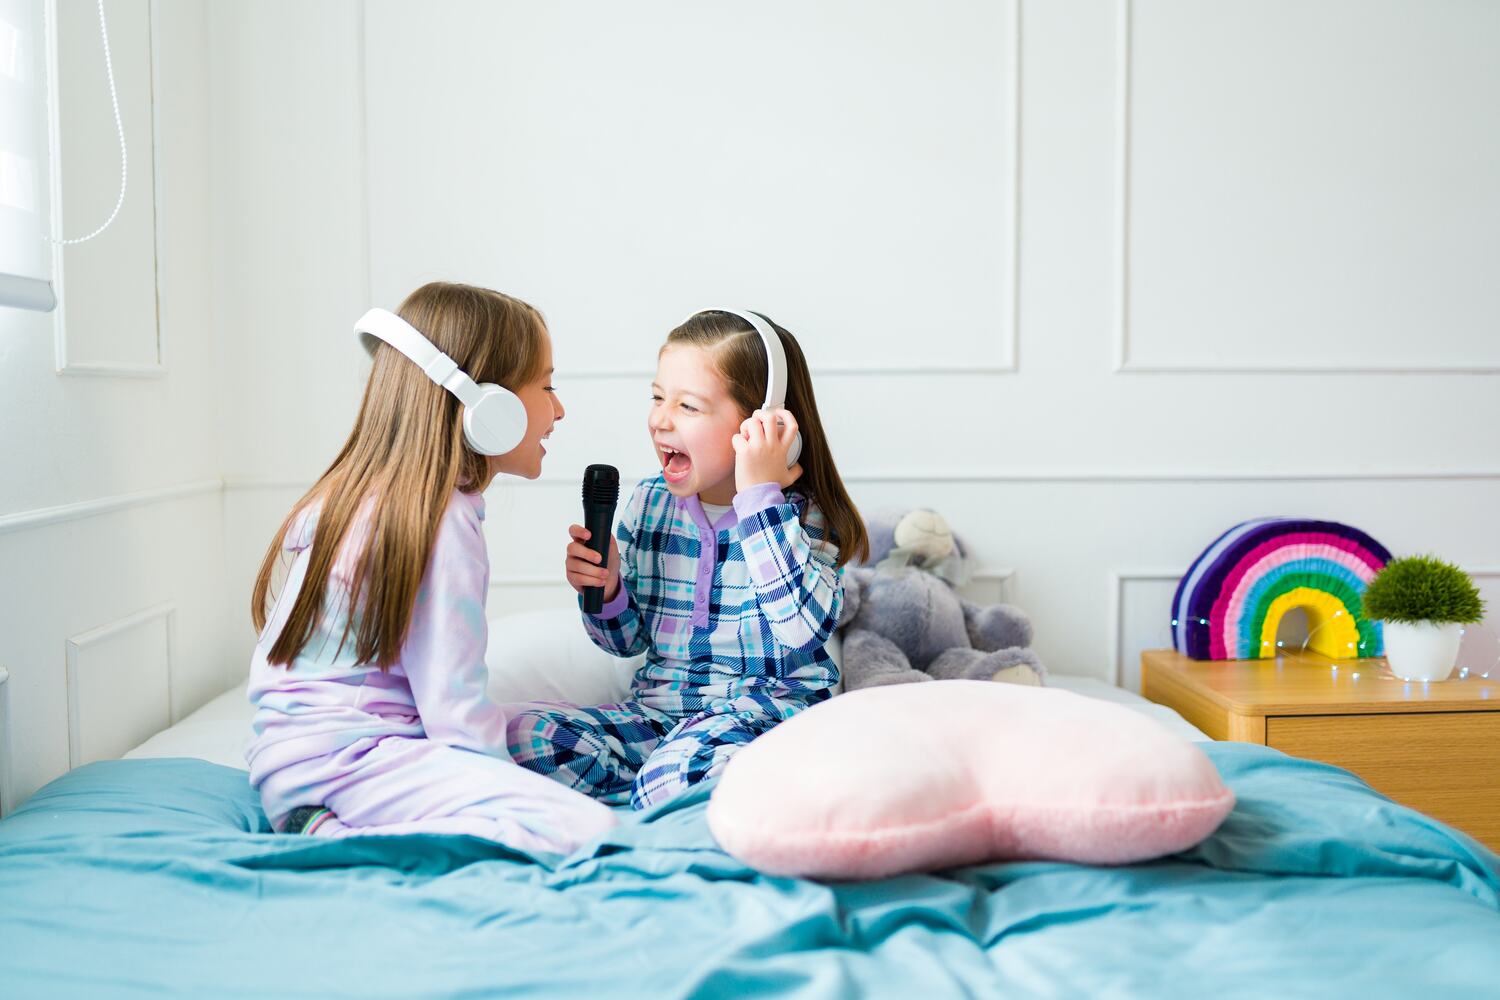 Play dates will help your child be sociable